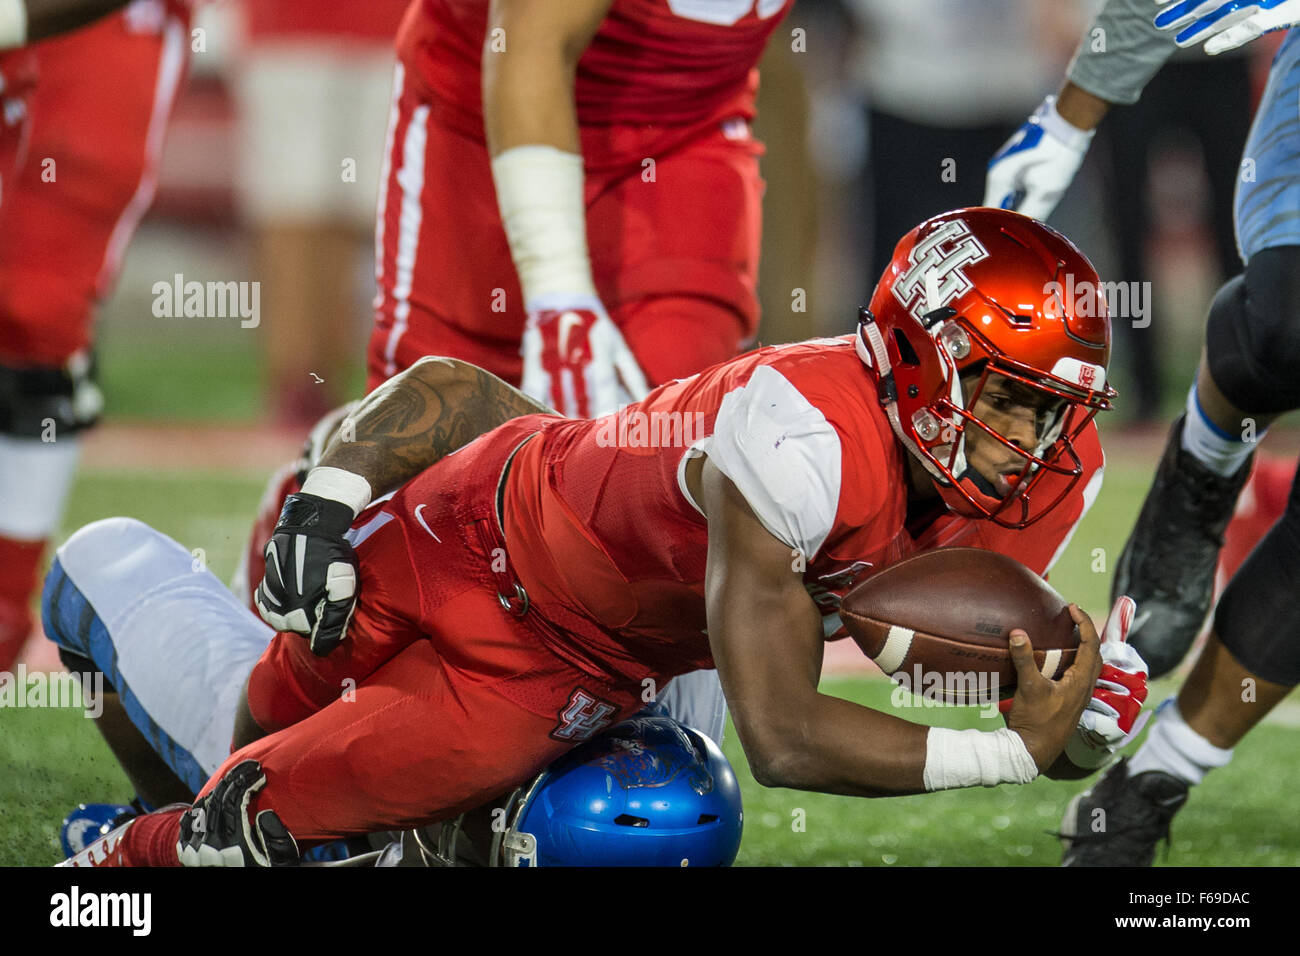 Houston, TX, USA. 14th Nov, 2015. Houston Cougars quarterback Greg Ward Jr. (1) is sacked by Memphis Tigers defensive lineman Ernest Suttles (48) during the 2nd quarter of an NCAA football game between the Memphis Tigers and the University of Houston Cougars at TDECU Stadium in Houston, TX.Trask Smith/CSM/Alamy Live News Stock Photo